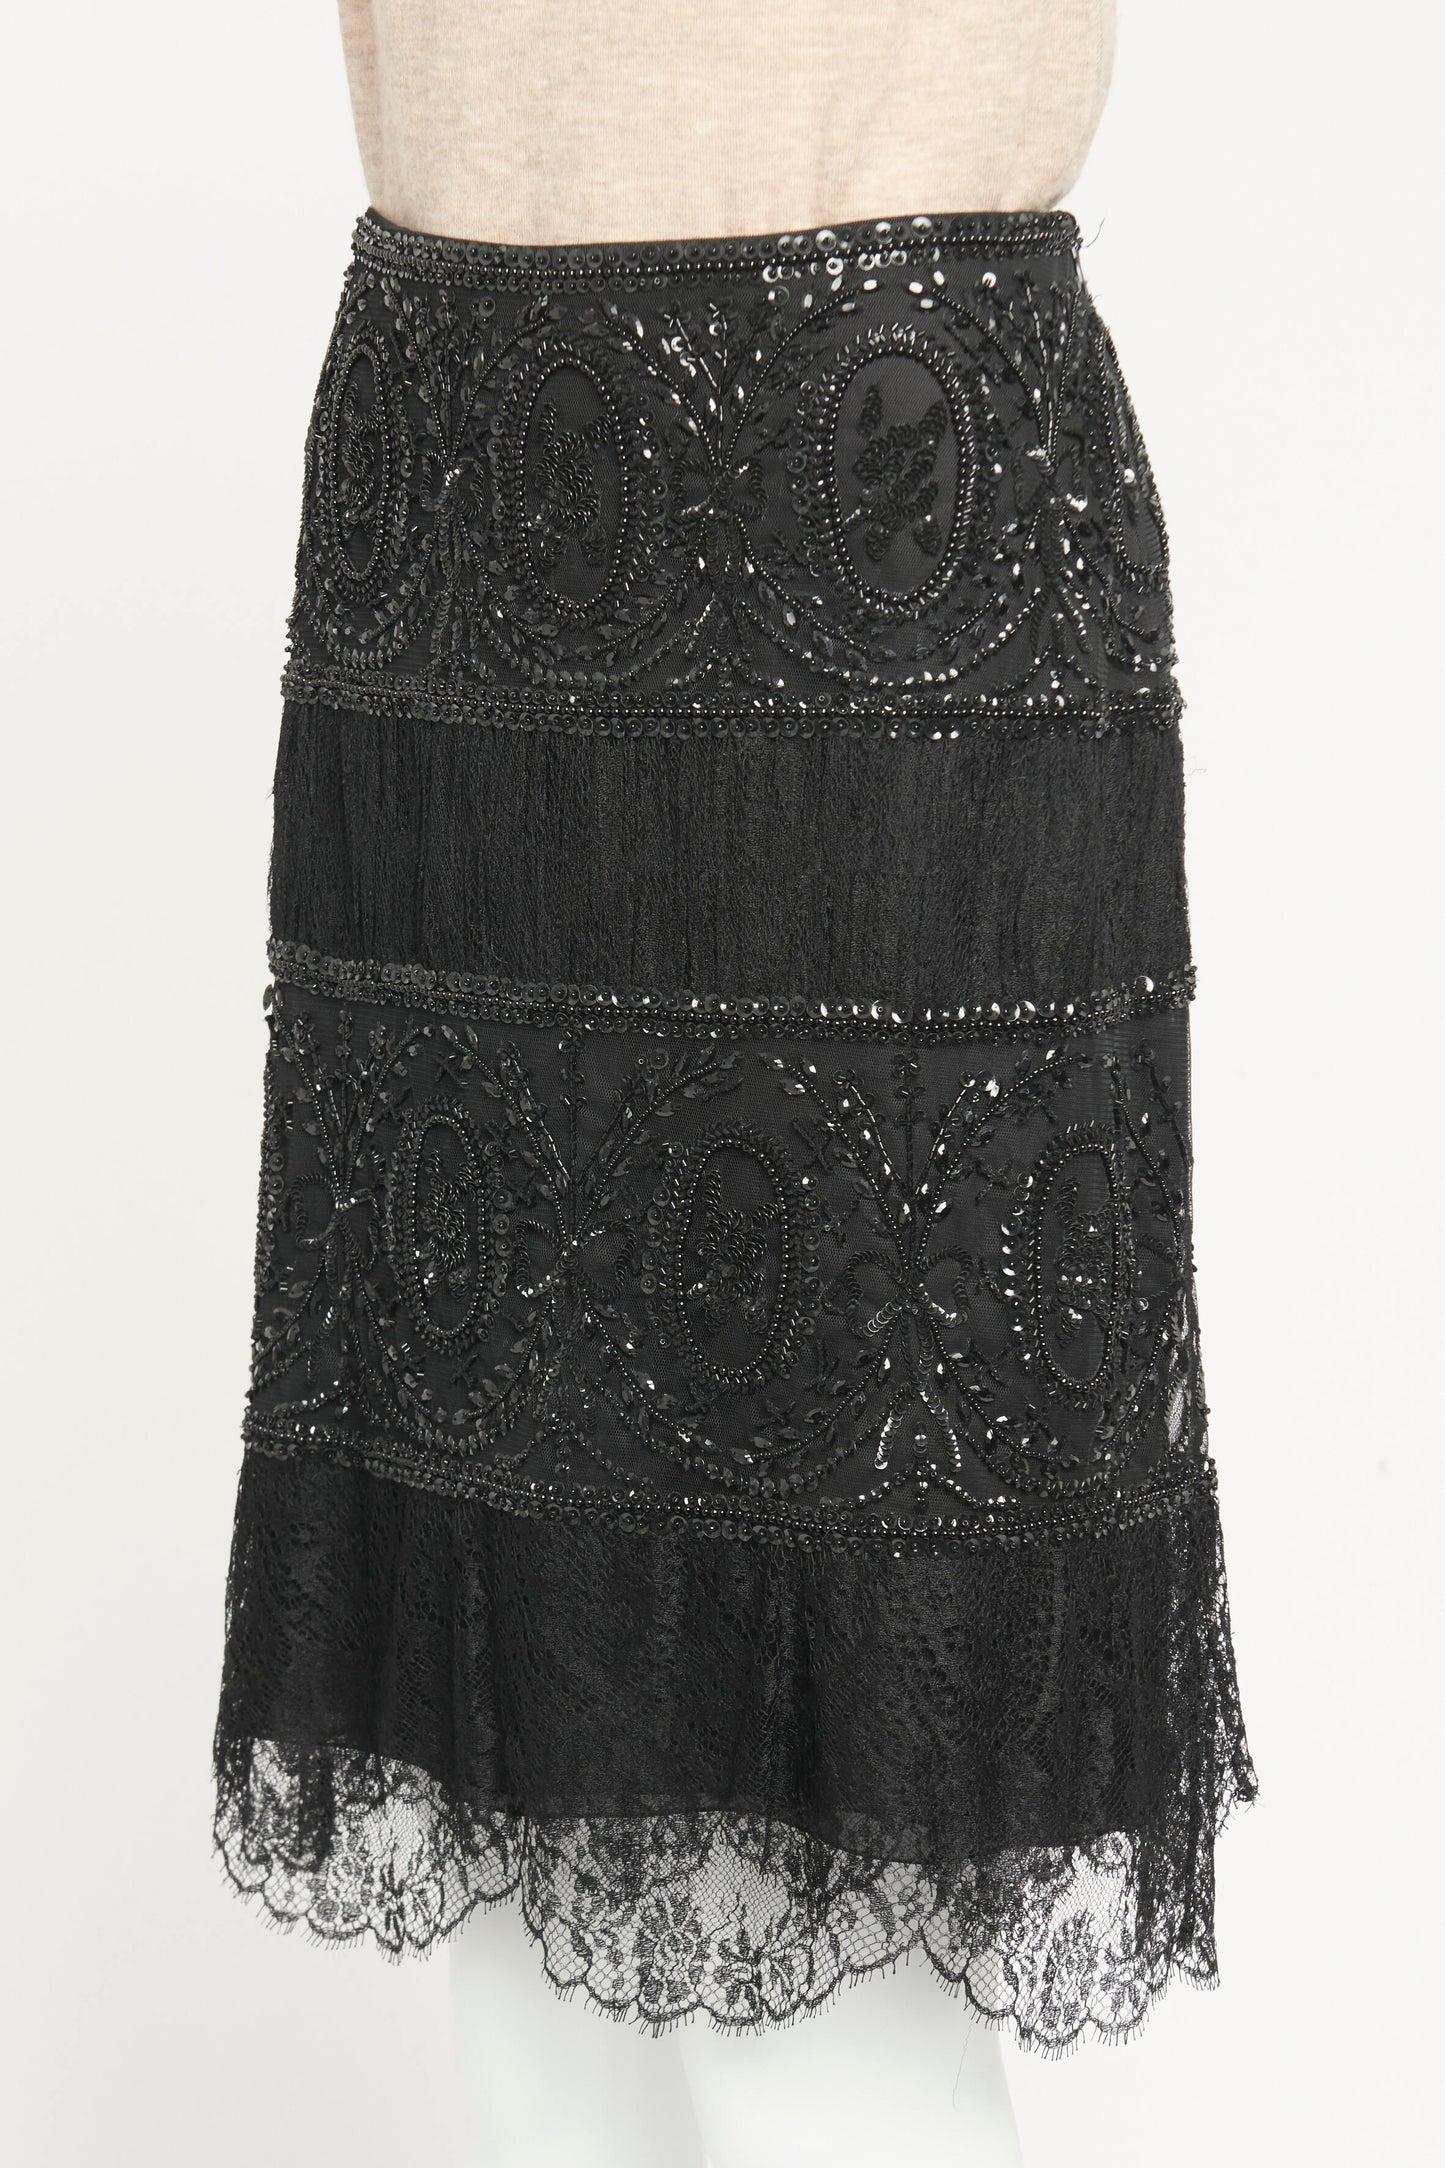 2000 Black Tulle Preowned Embellished Lace Knee Length Skirt